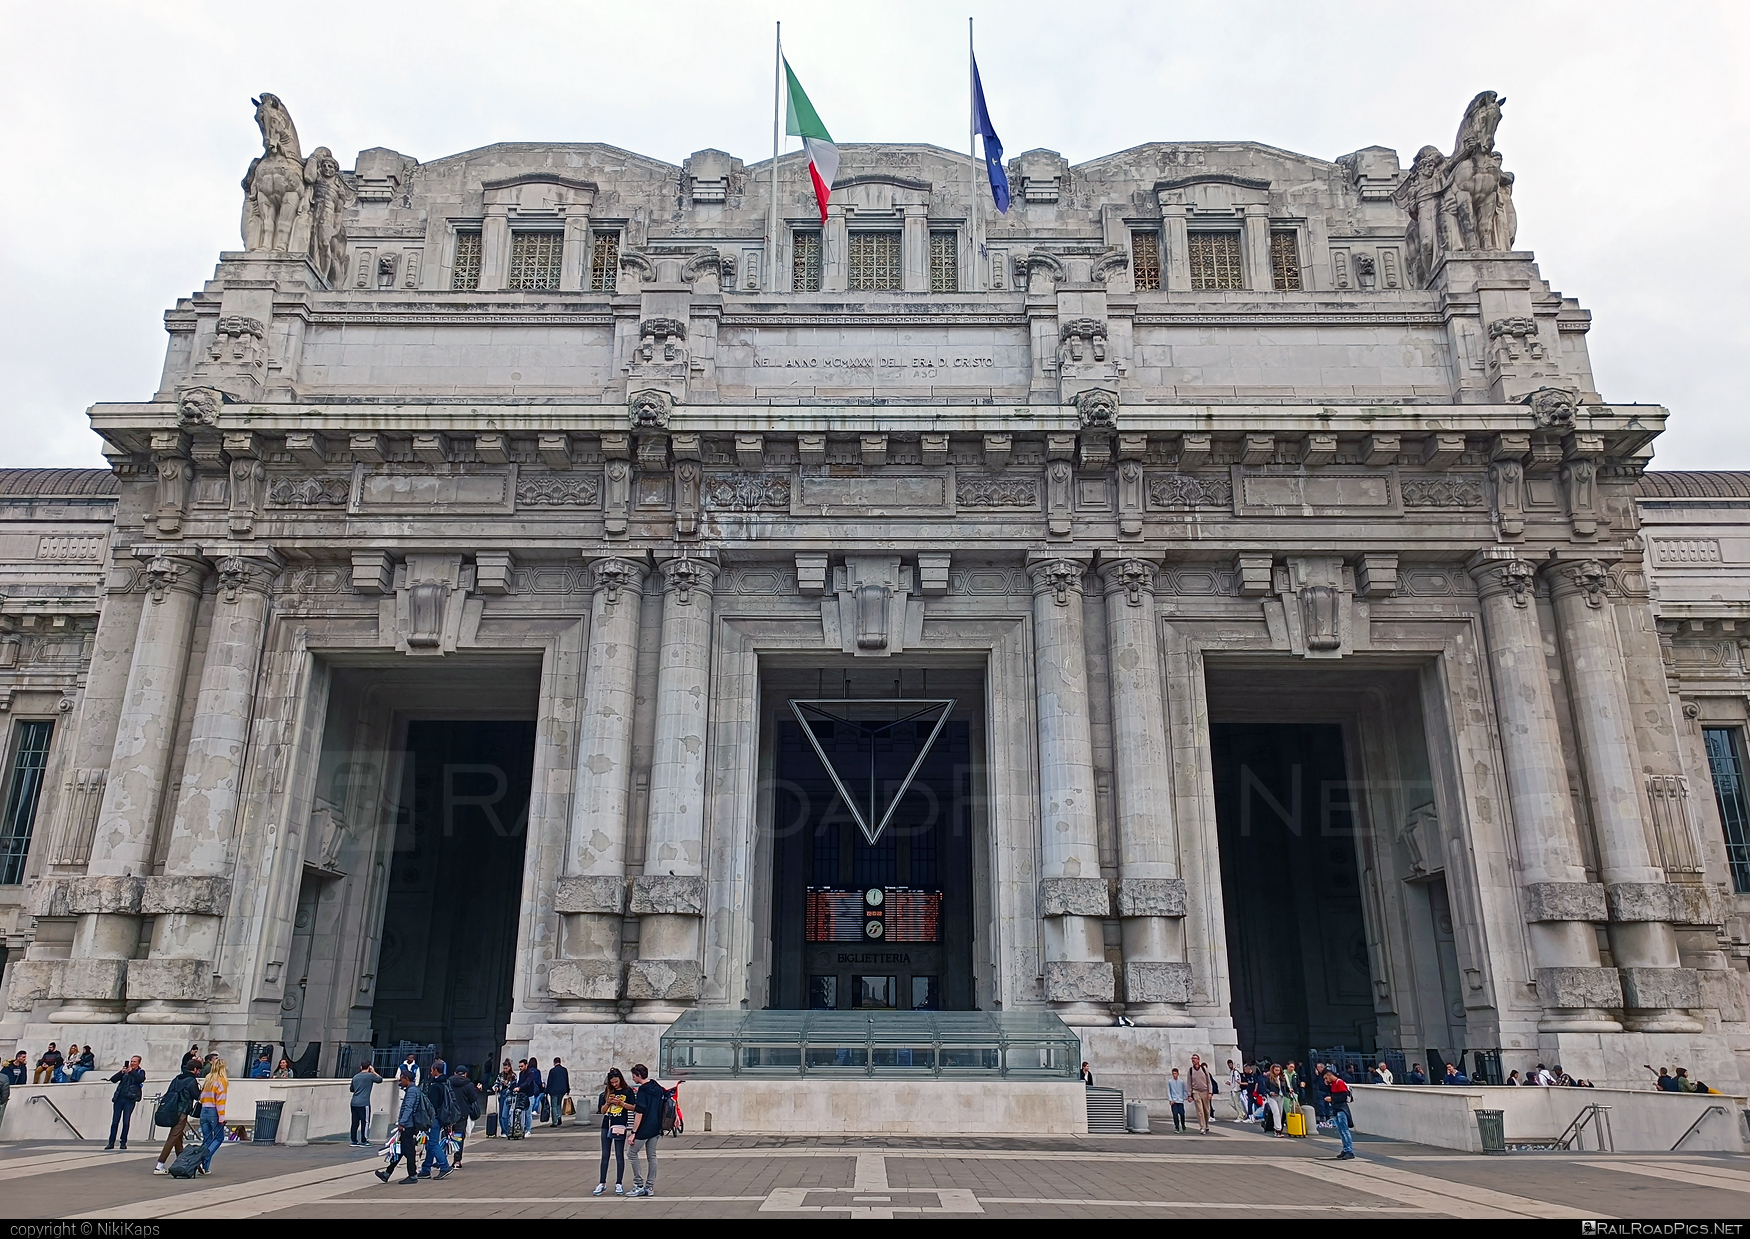 Milano Centrale location overview #ferroviedellostato #fs #fsitaliane #milanoCentrale #milanoCentraleRailwayStation #milanoCentraleStation